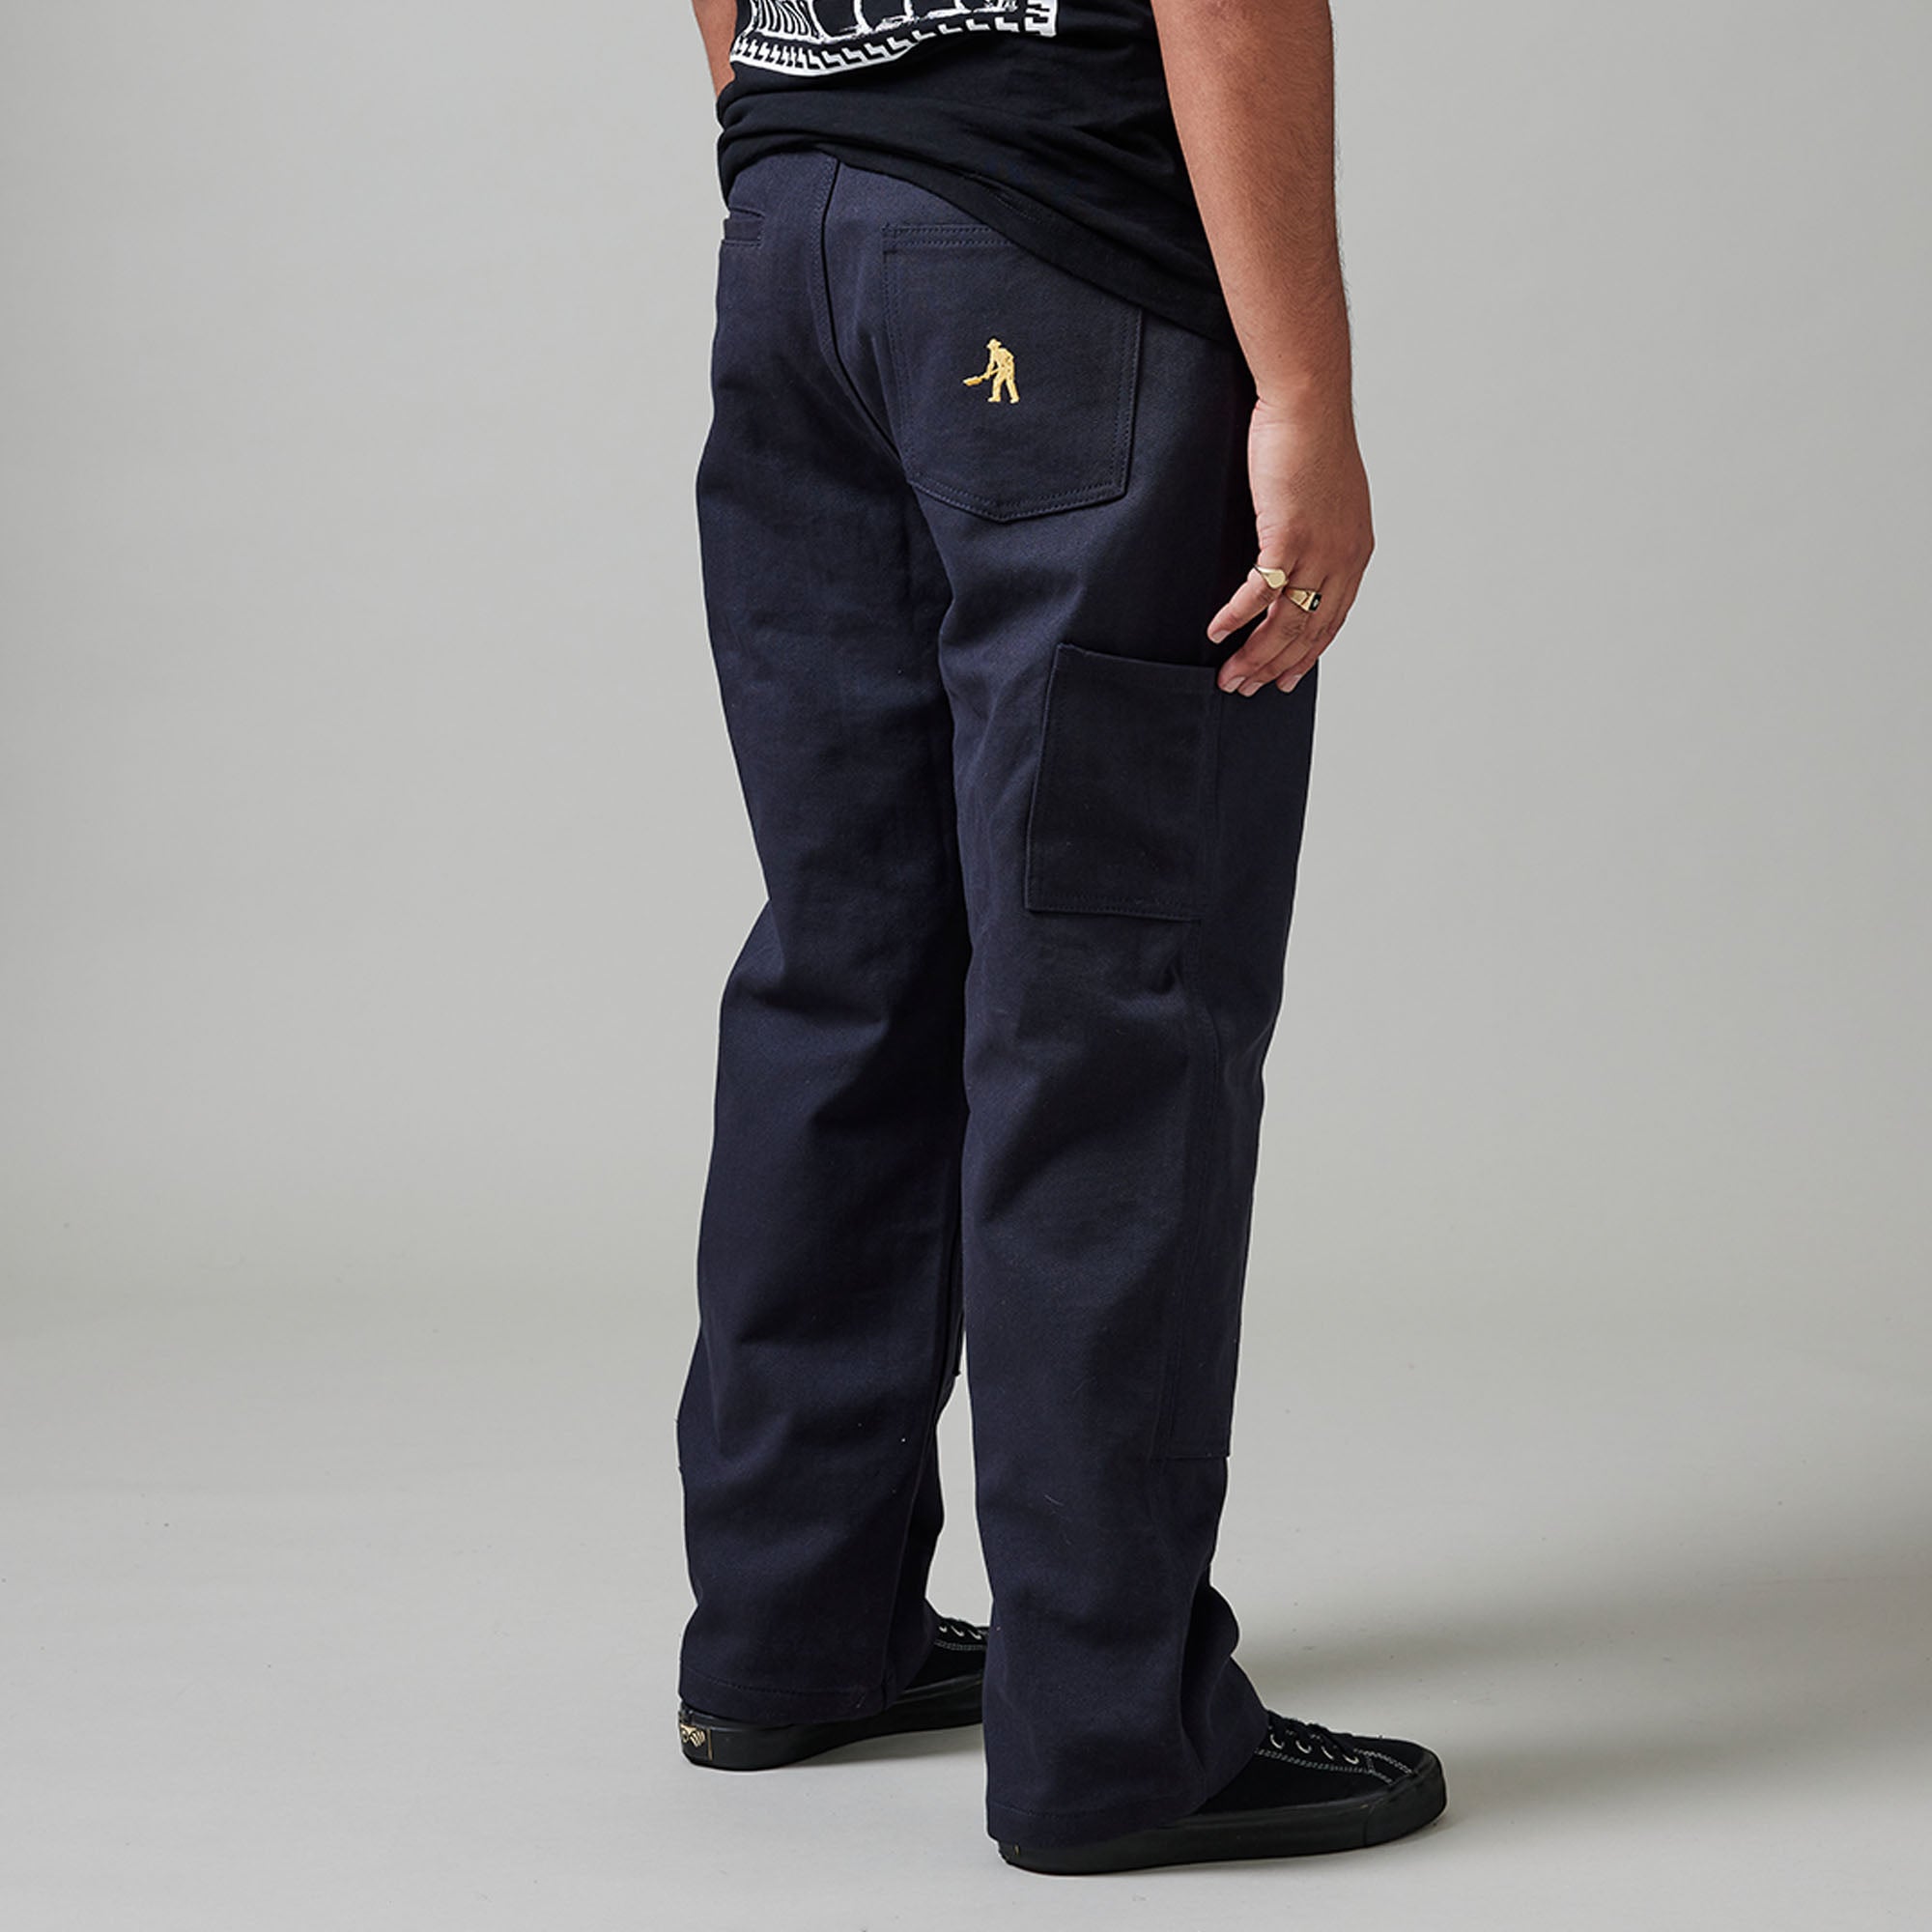 Pass~Port Double Knee Diggers Club Pant - Ink